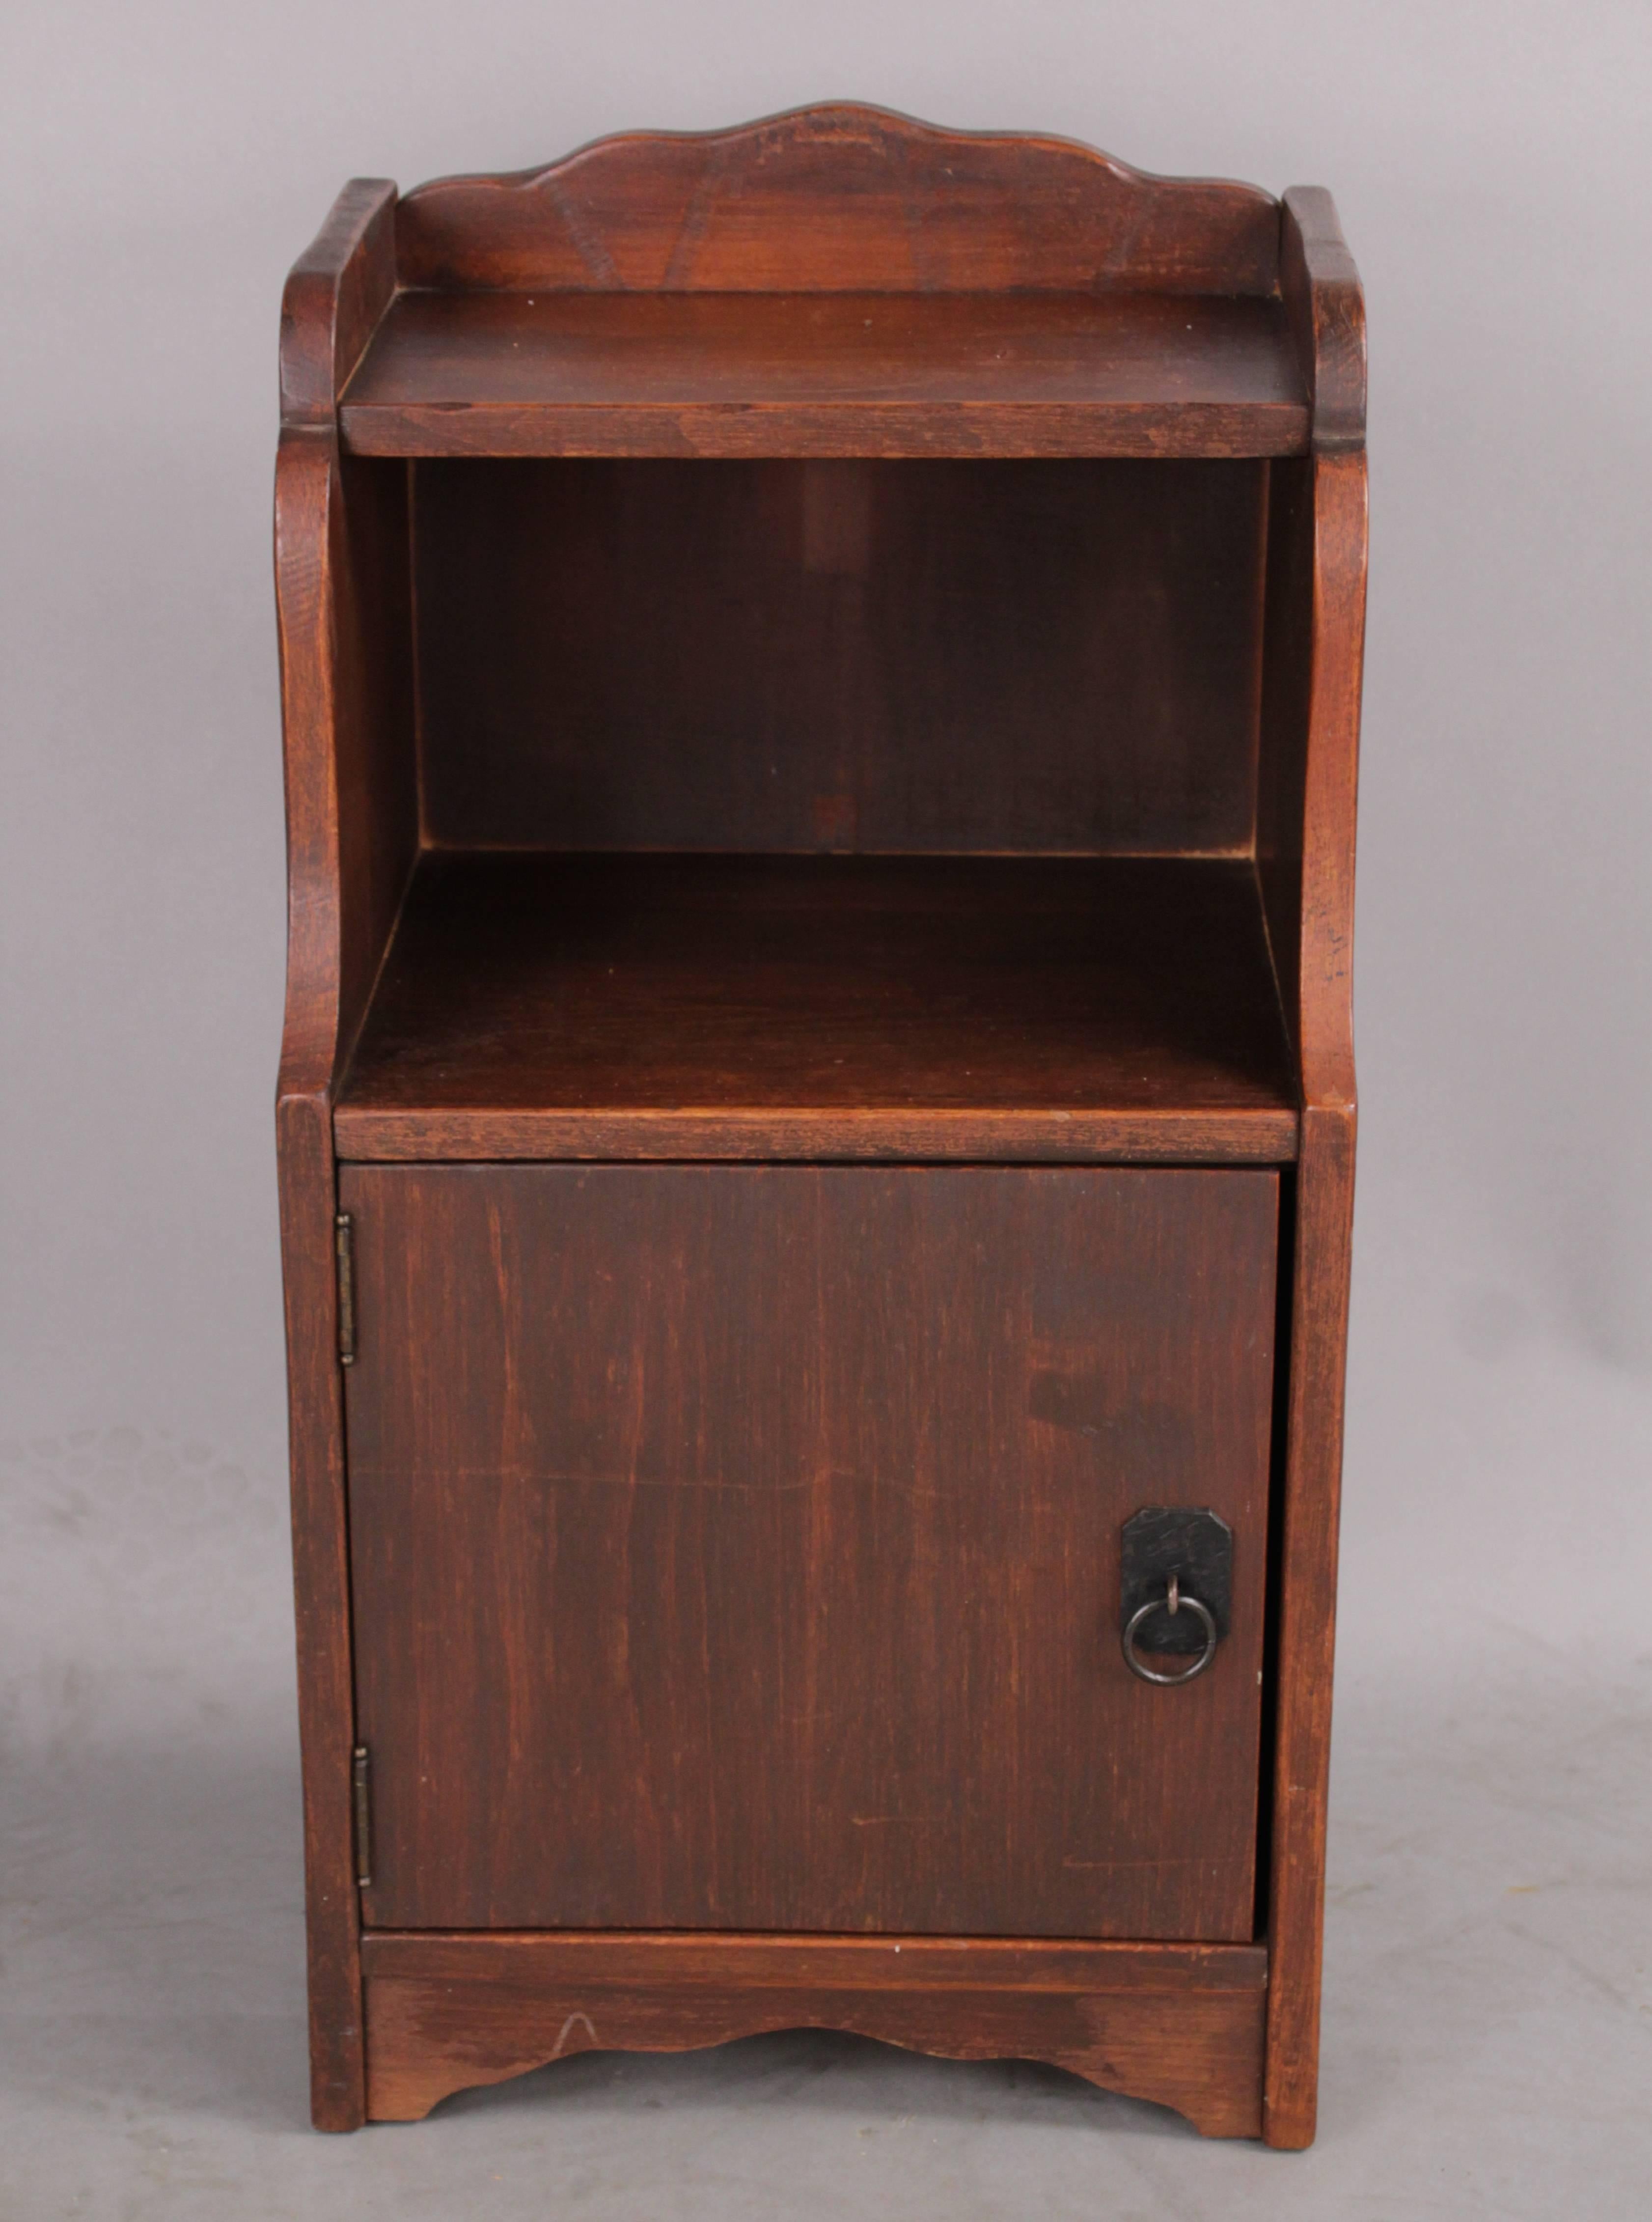 Spanish Revival nightstand made by the 1920s California Spanish Furniture Company.